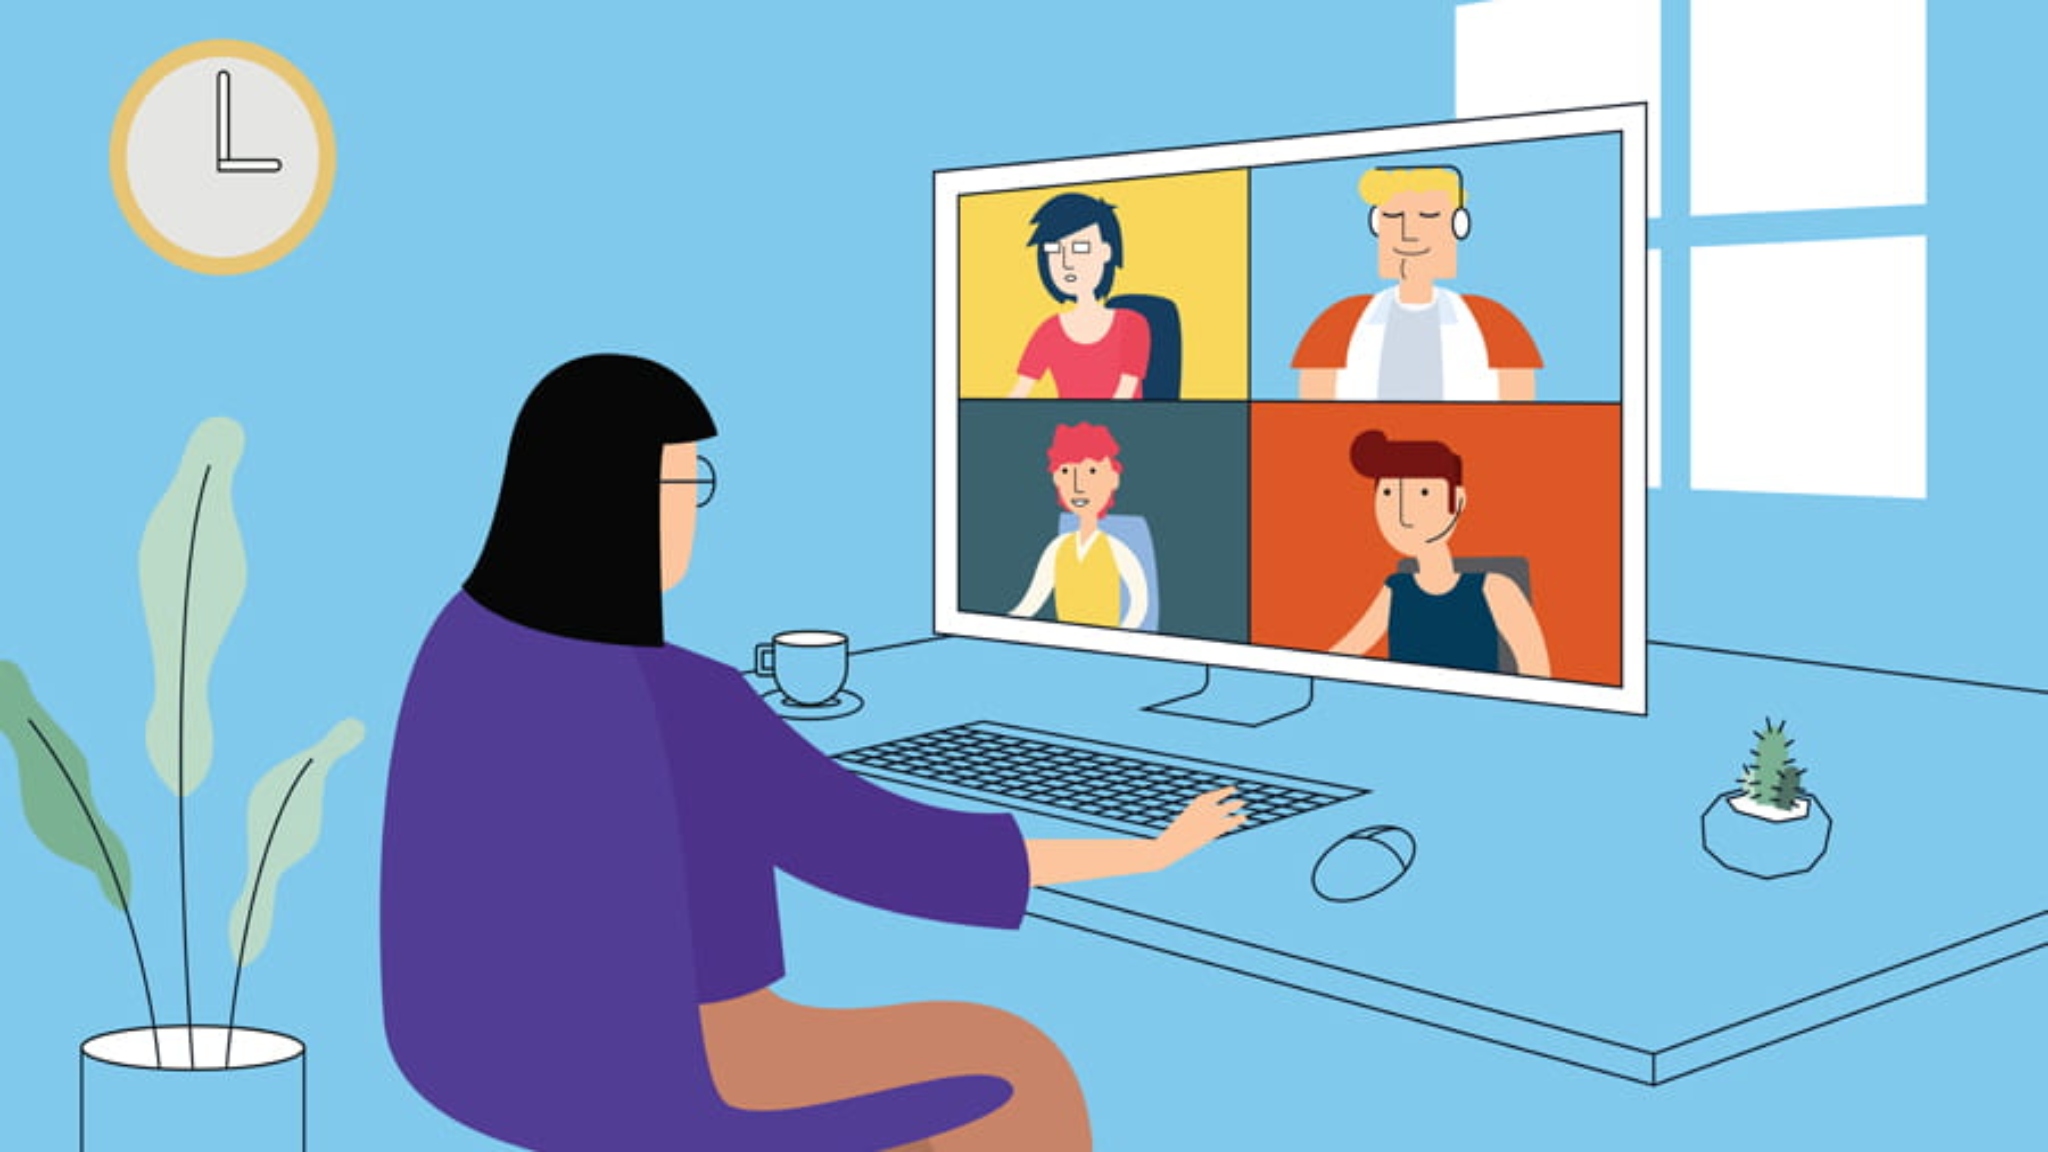 5 Ways To Successfully Deliver A Business Pitch Through Video Conferencing